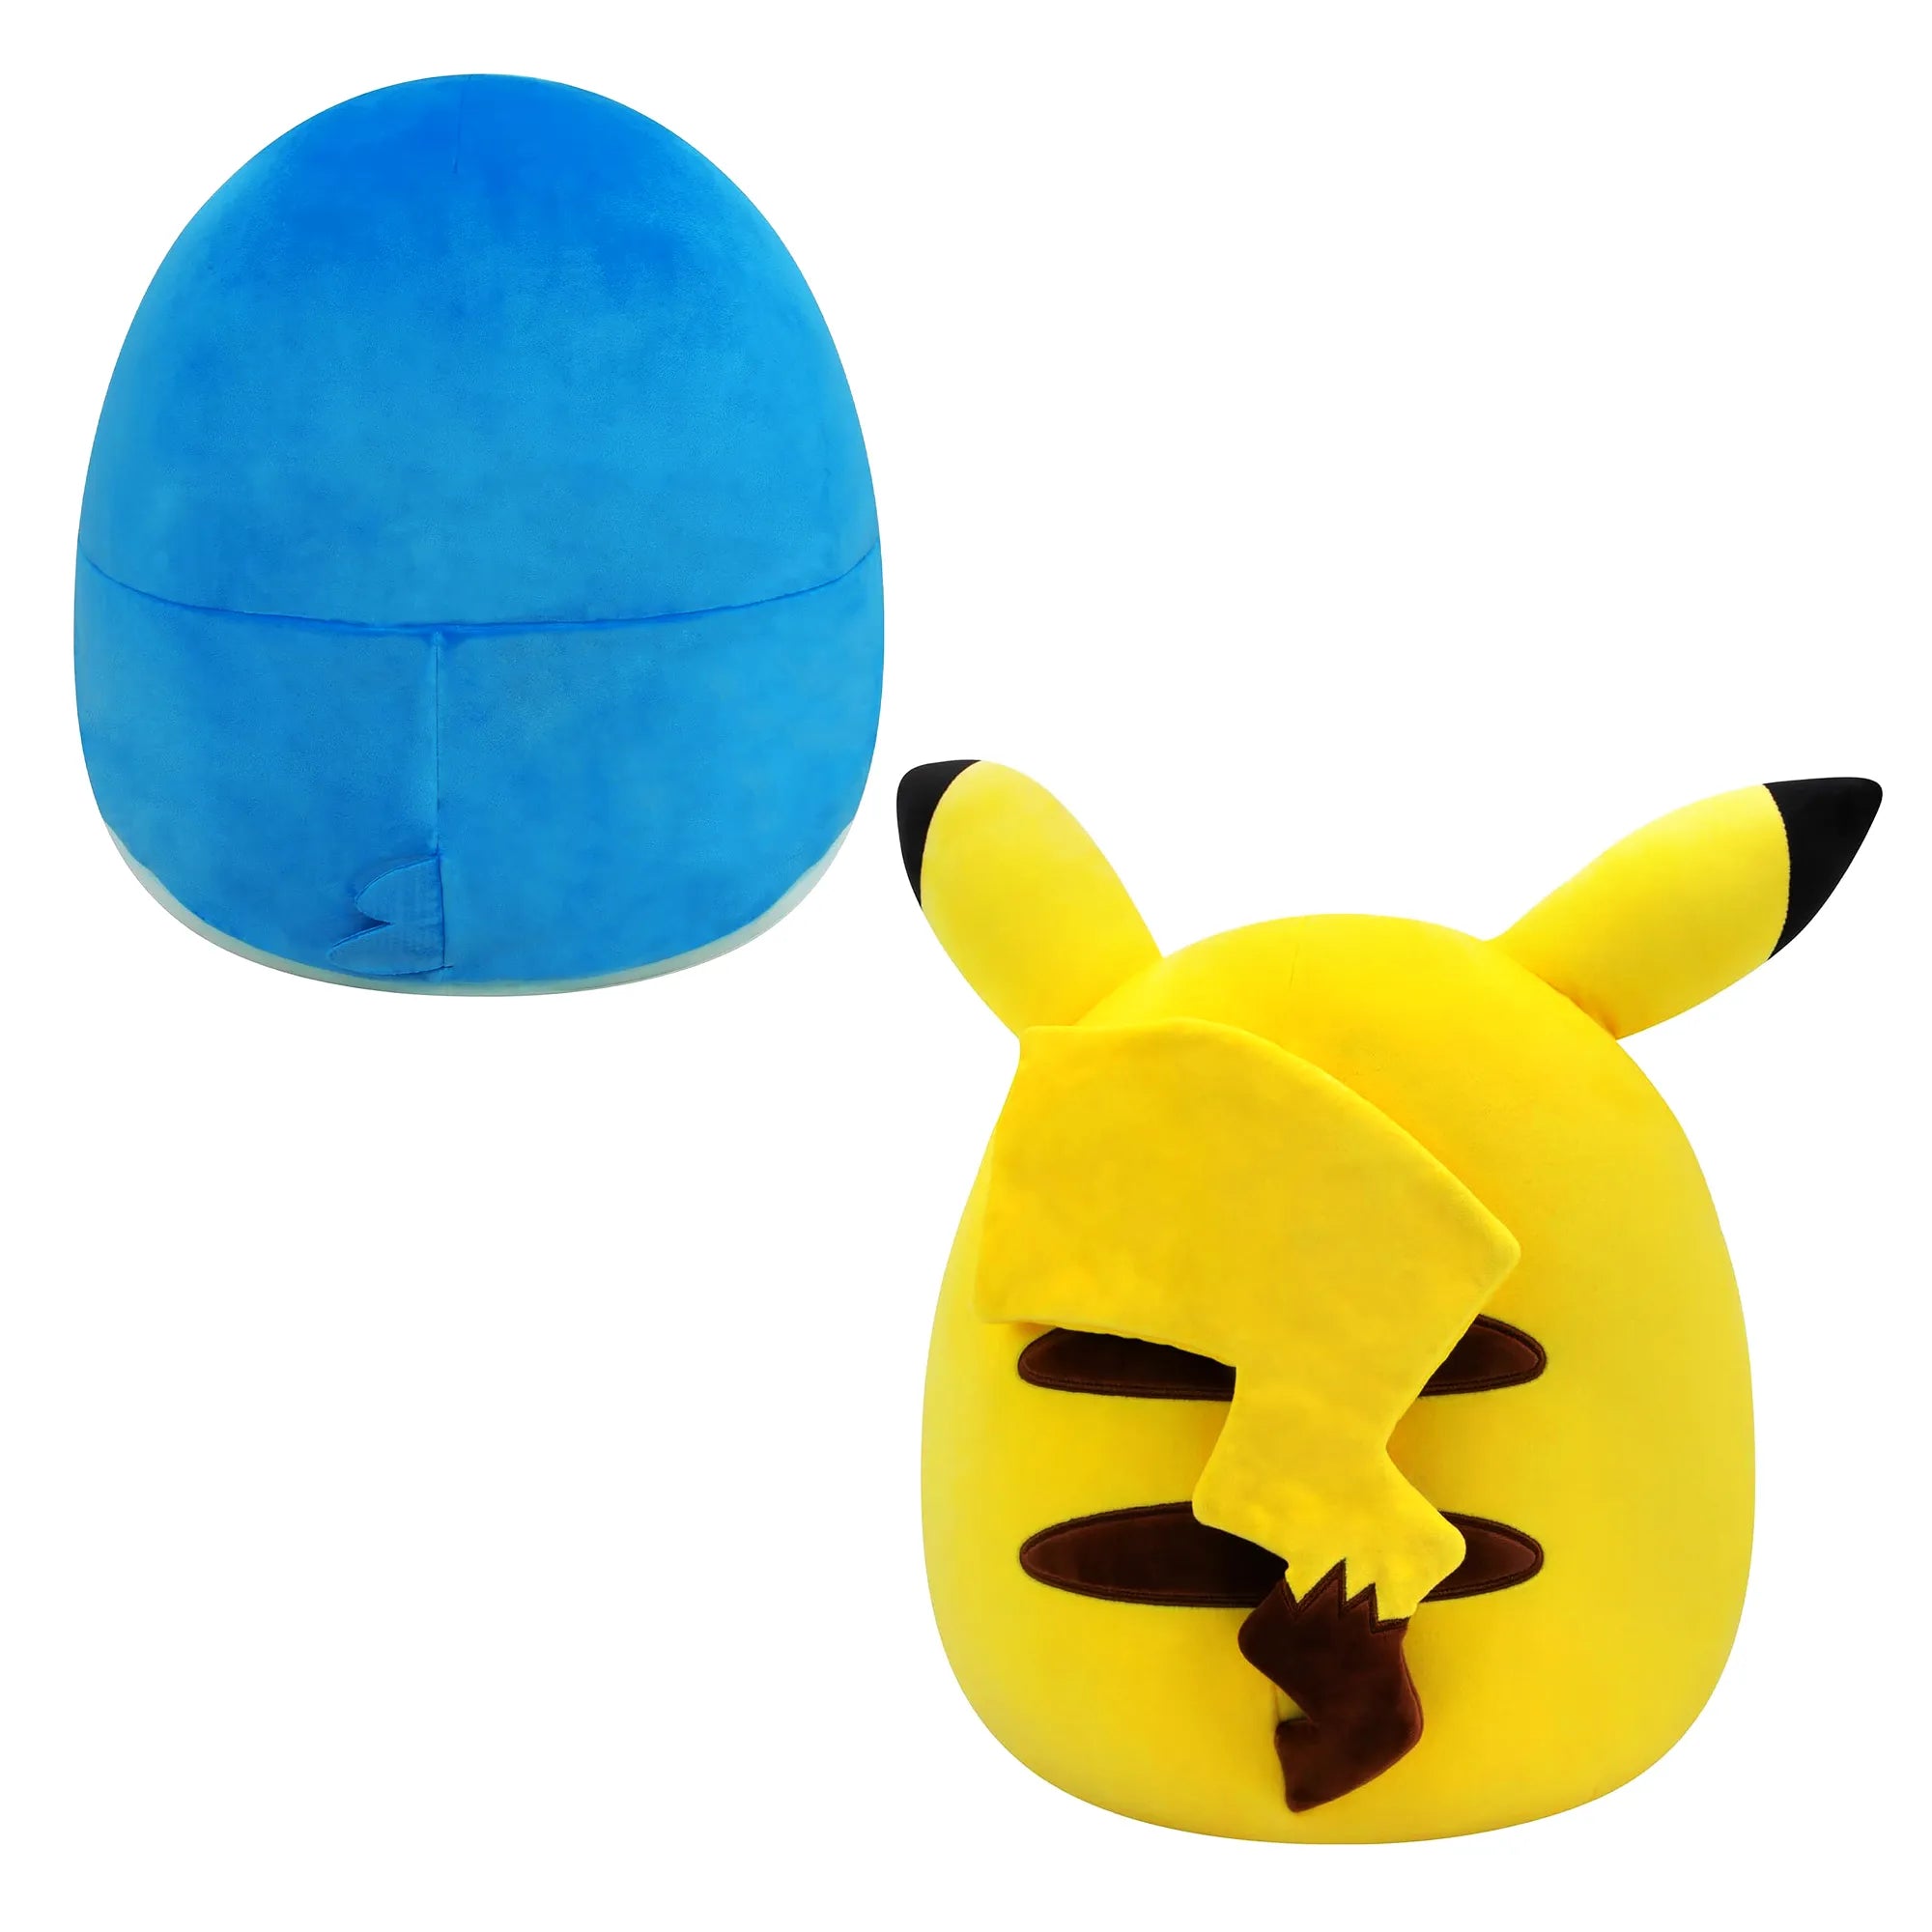 Squishmallows 10" Pikachu & Piplup Bundle - Age 3+ - Brown's Hobby & Game